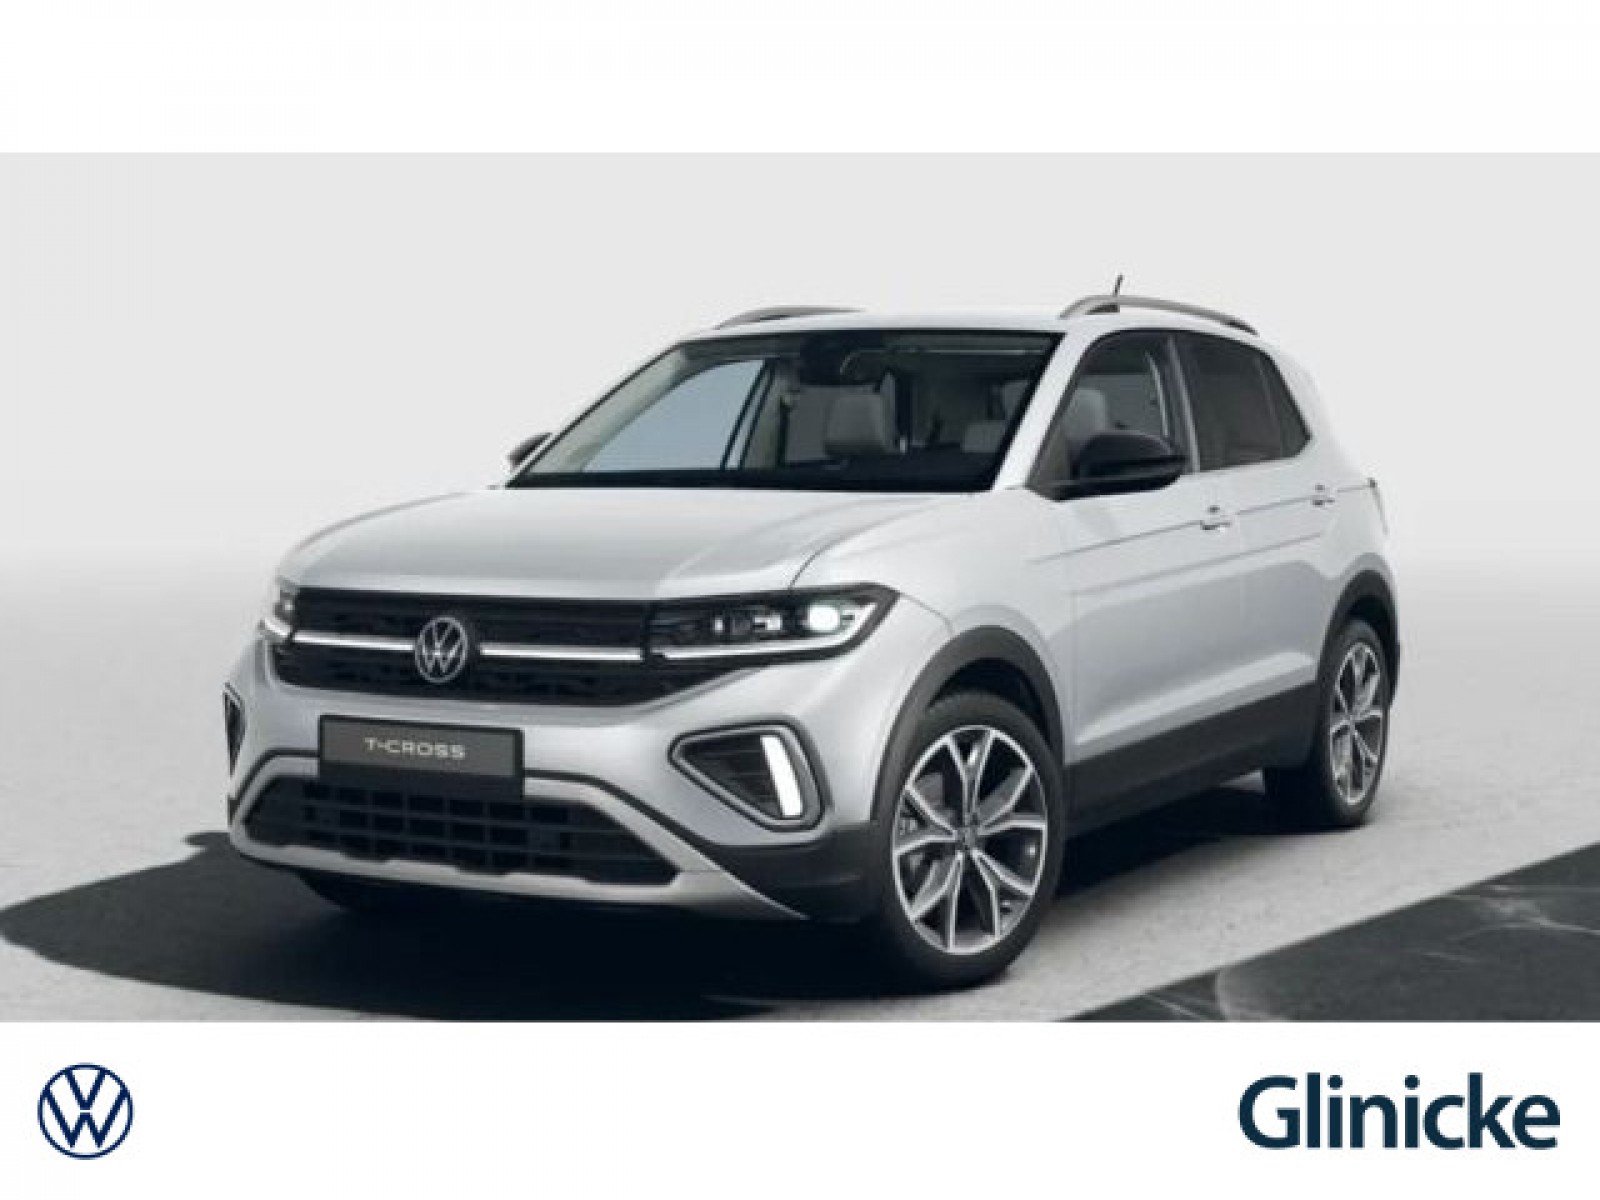 T-Cross Style 1.0 l TSI OPF 85 kW (116 PS) 6-Gang *AirCaare*RearView*Discover Media*